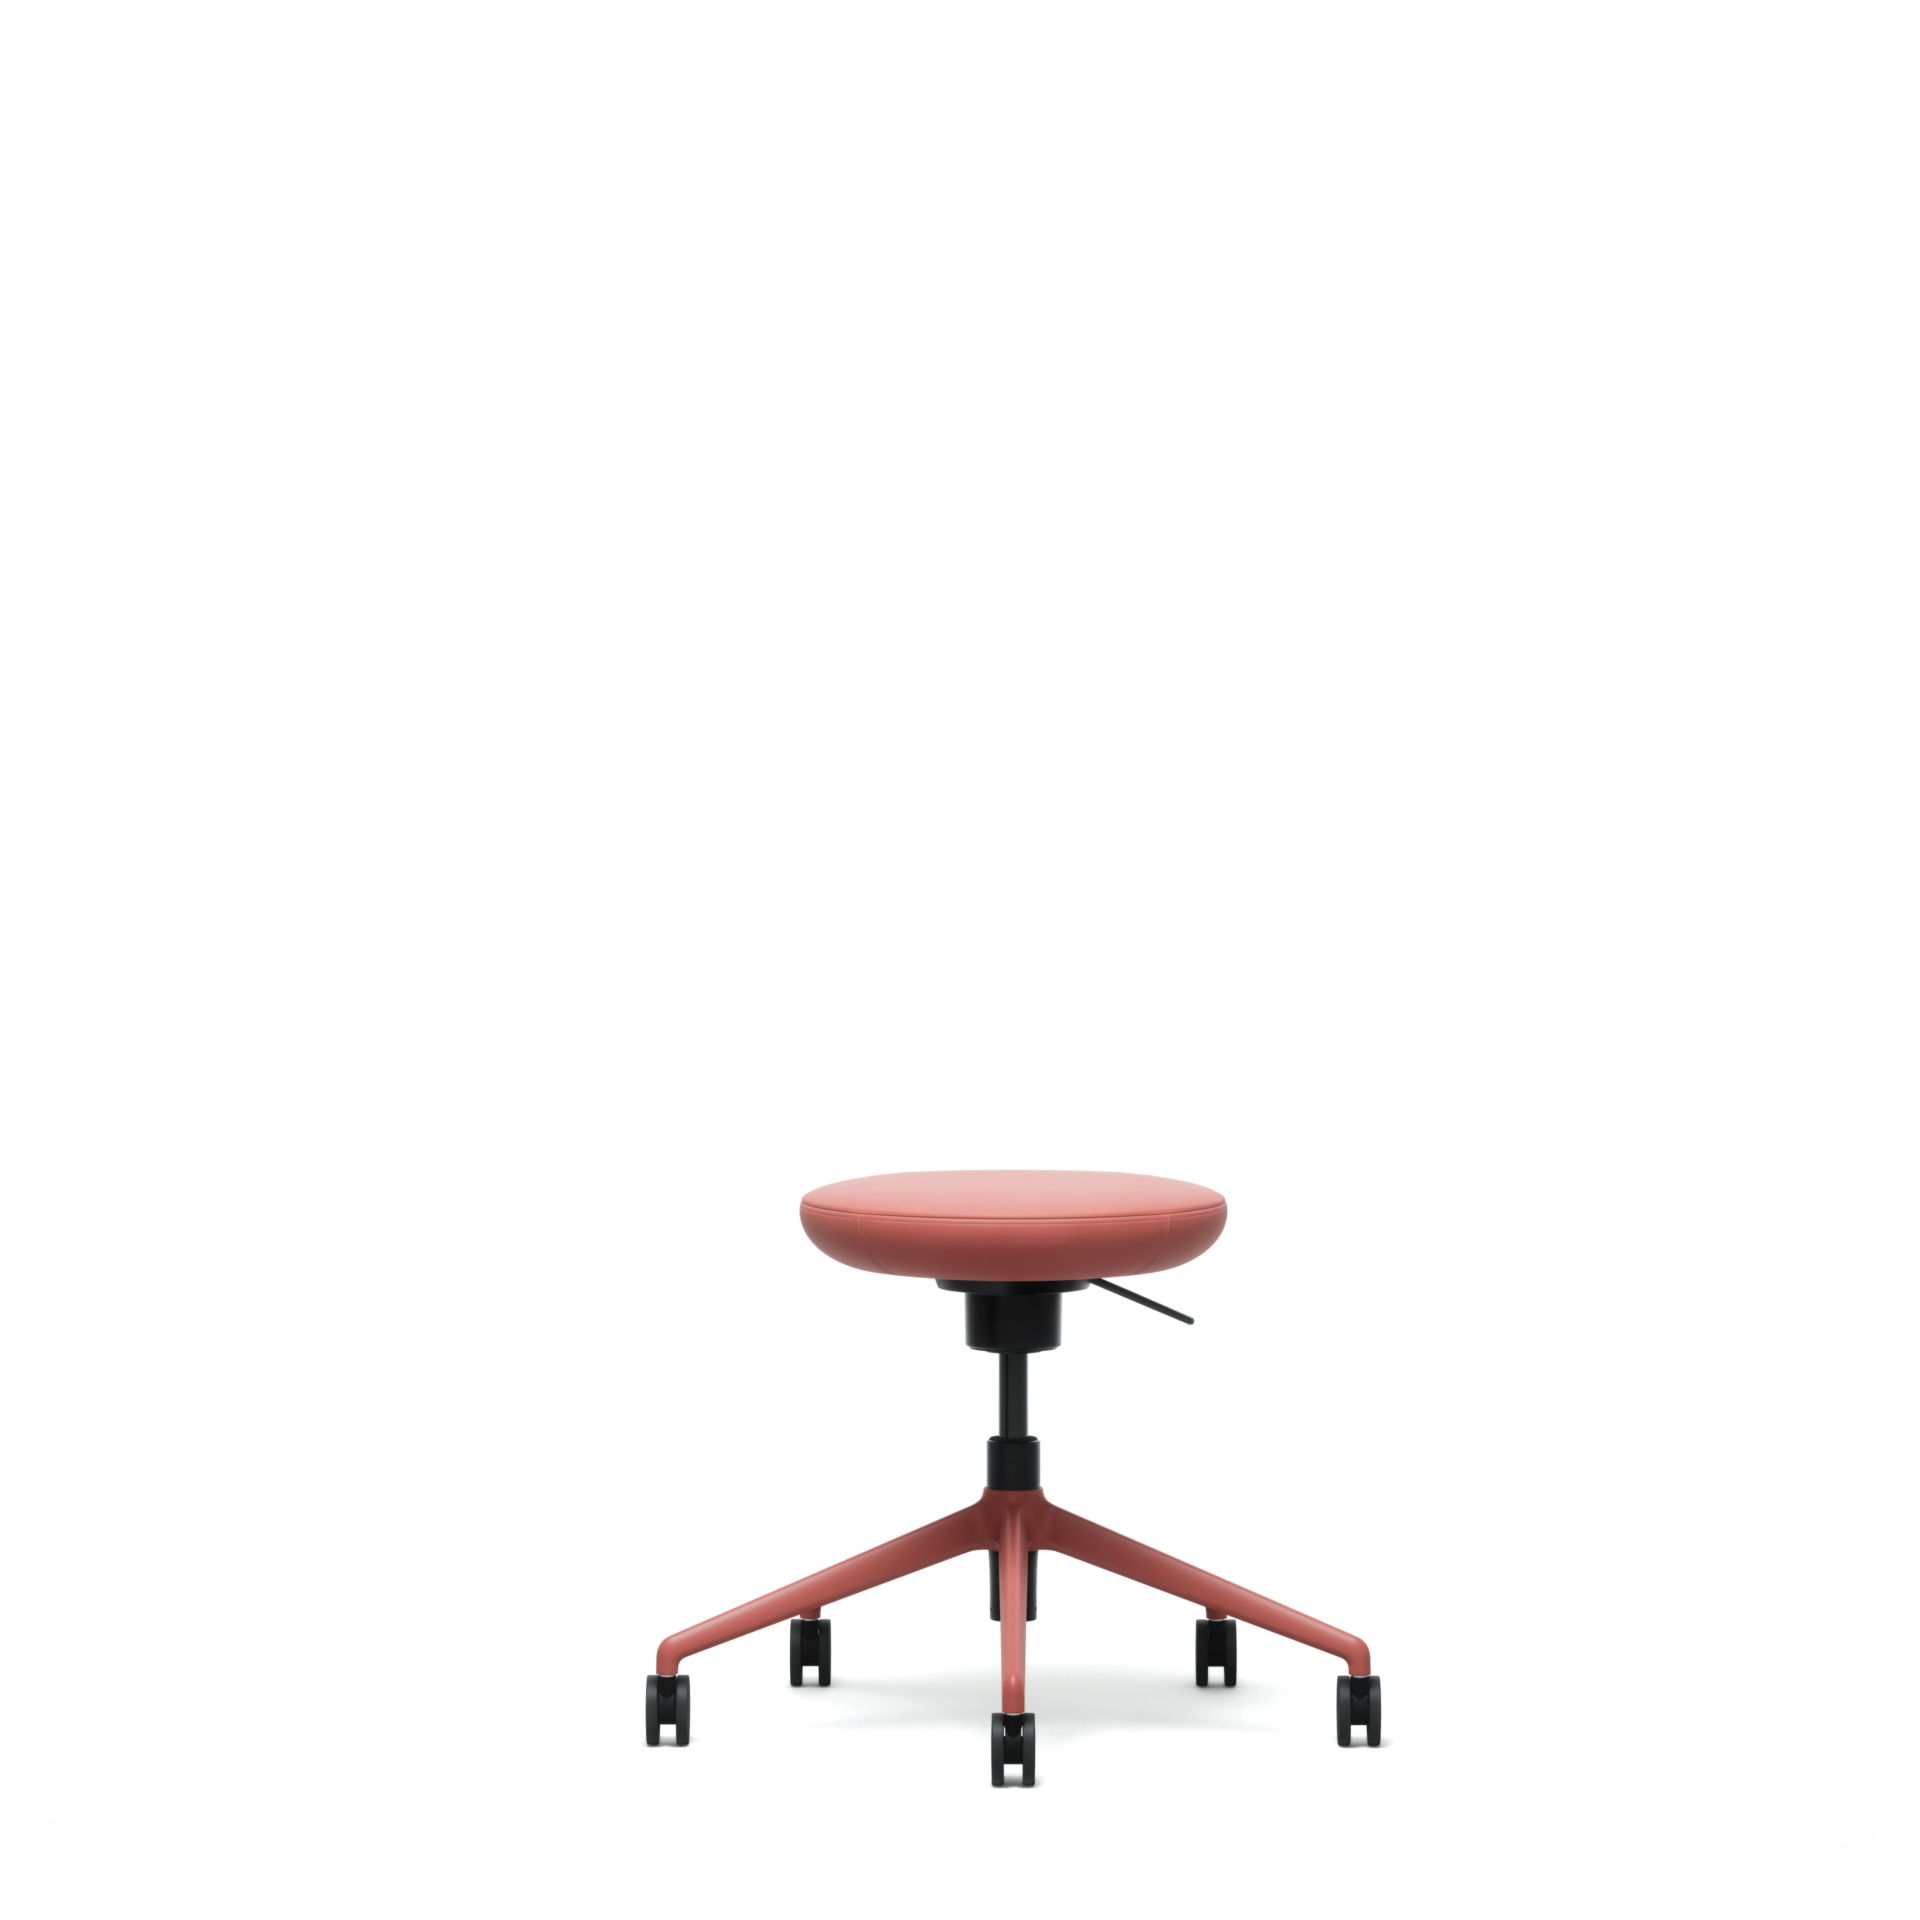 Spine Spine stool product image 5